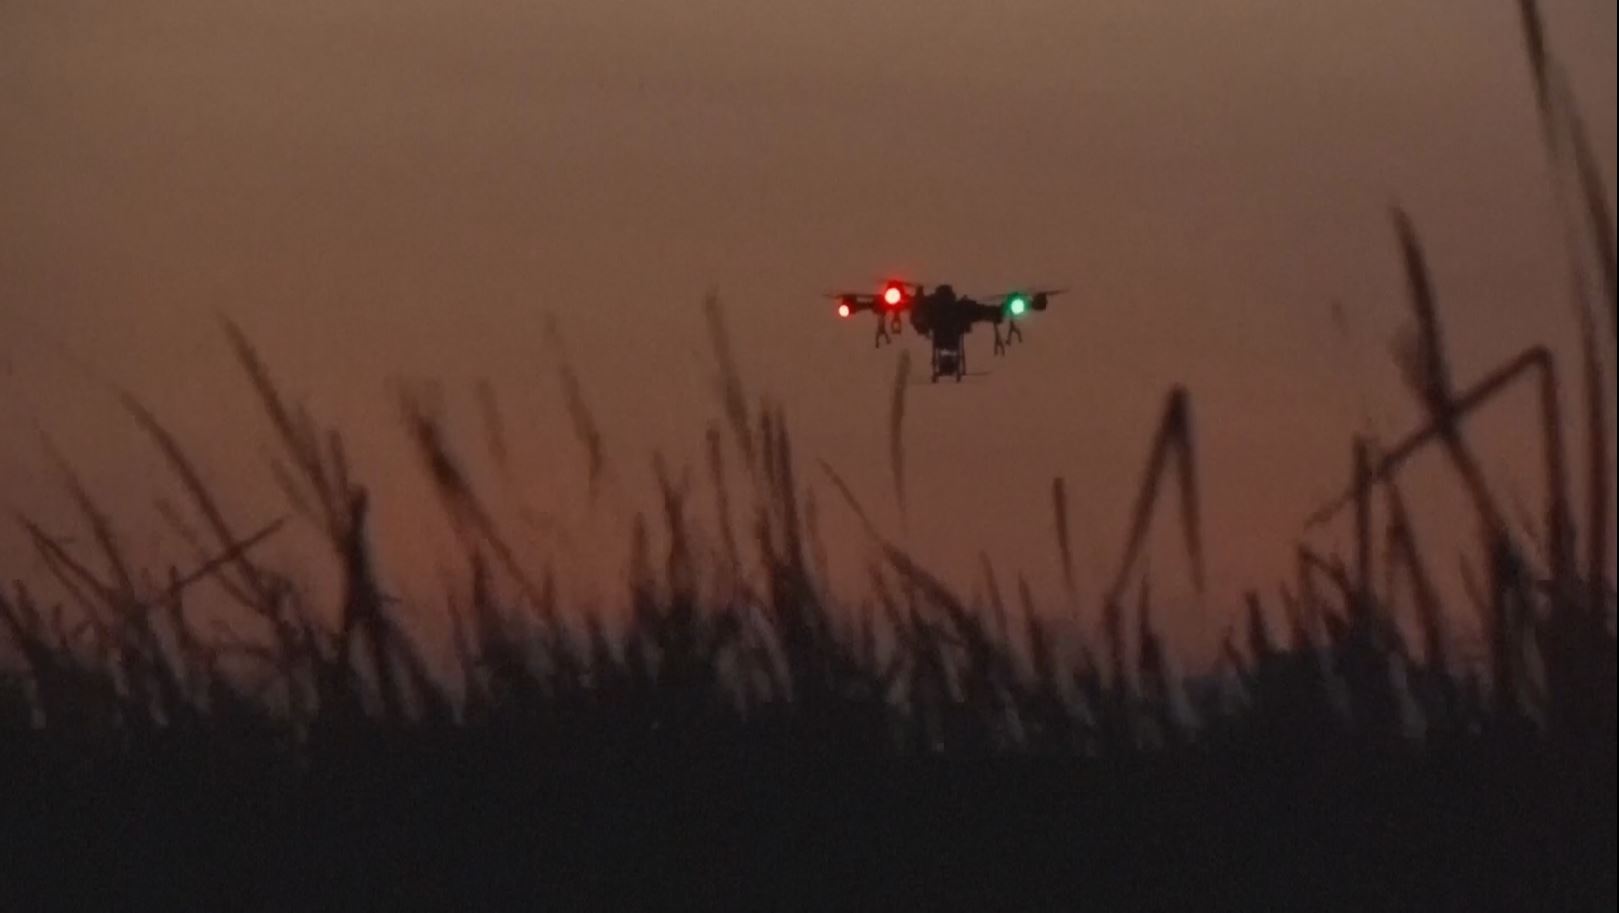 Pesticides Spray Using Drone On Attacking Birds In Kenya